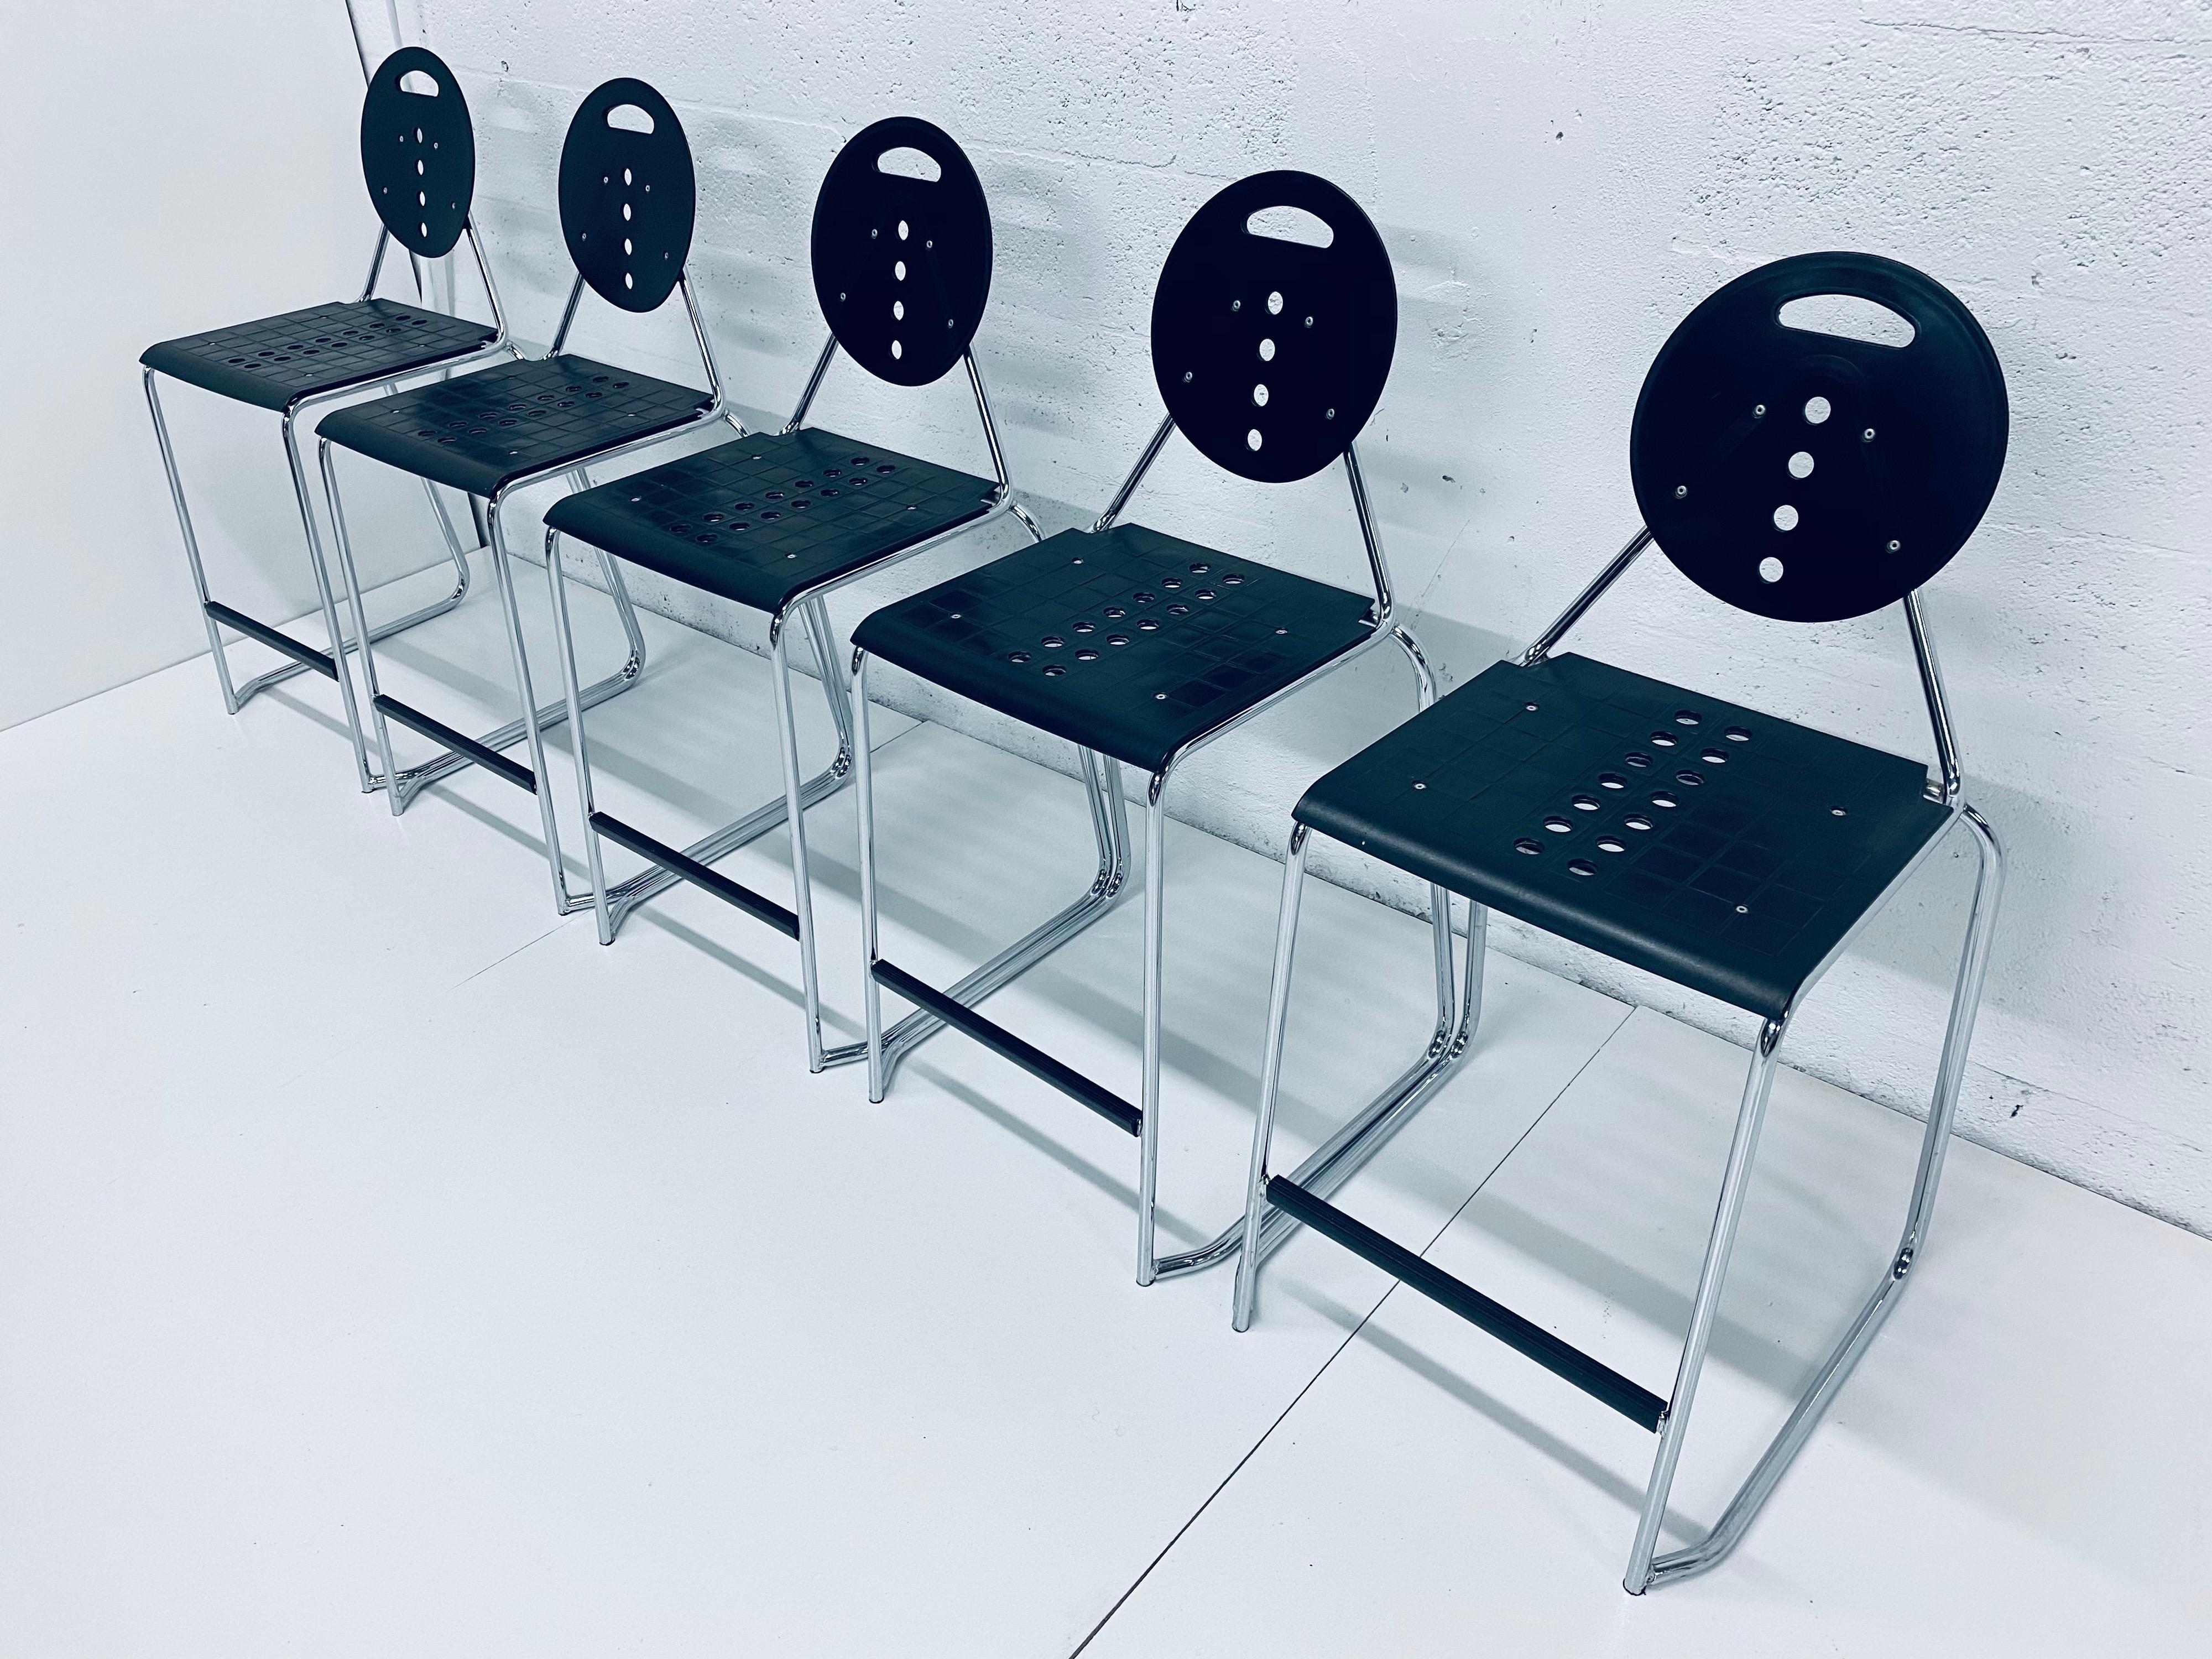 Set of 5 Postmodern Memphis style barstools by Carlo Bimbi and Nilo Gioacchini for Segis Italia, circa 1980s. Chairs are made of black moulded plastic attached to a tubular chrome frame. The chairs stack for easy storage.